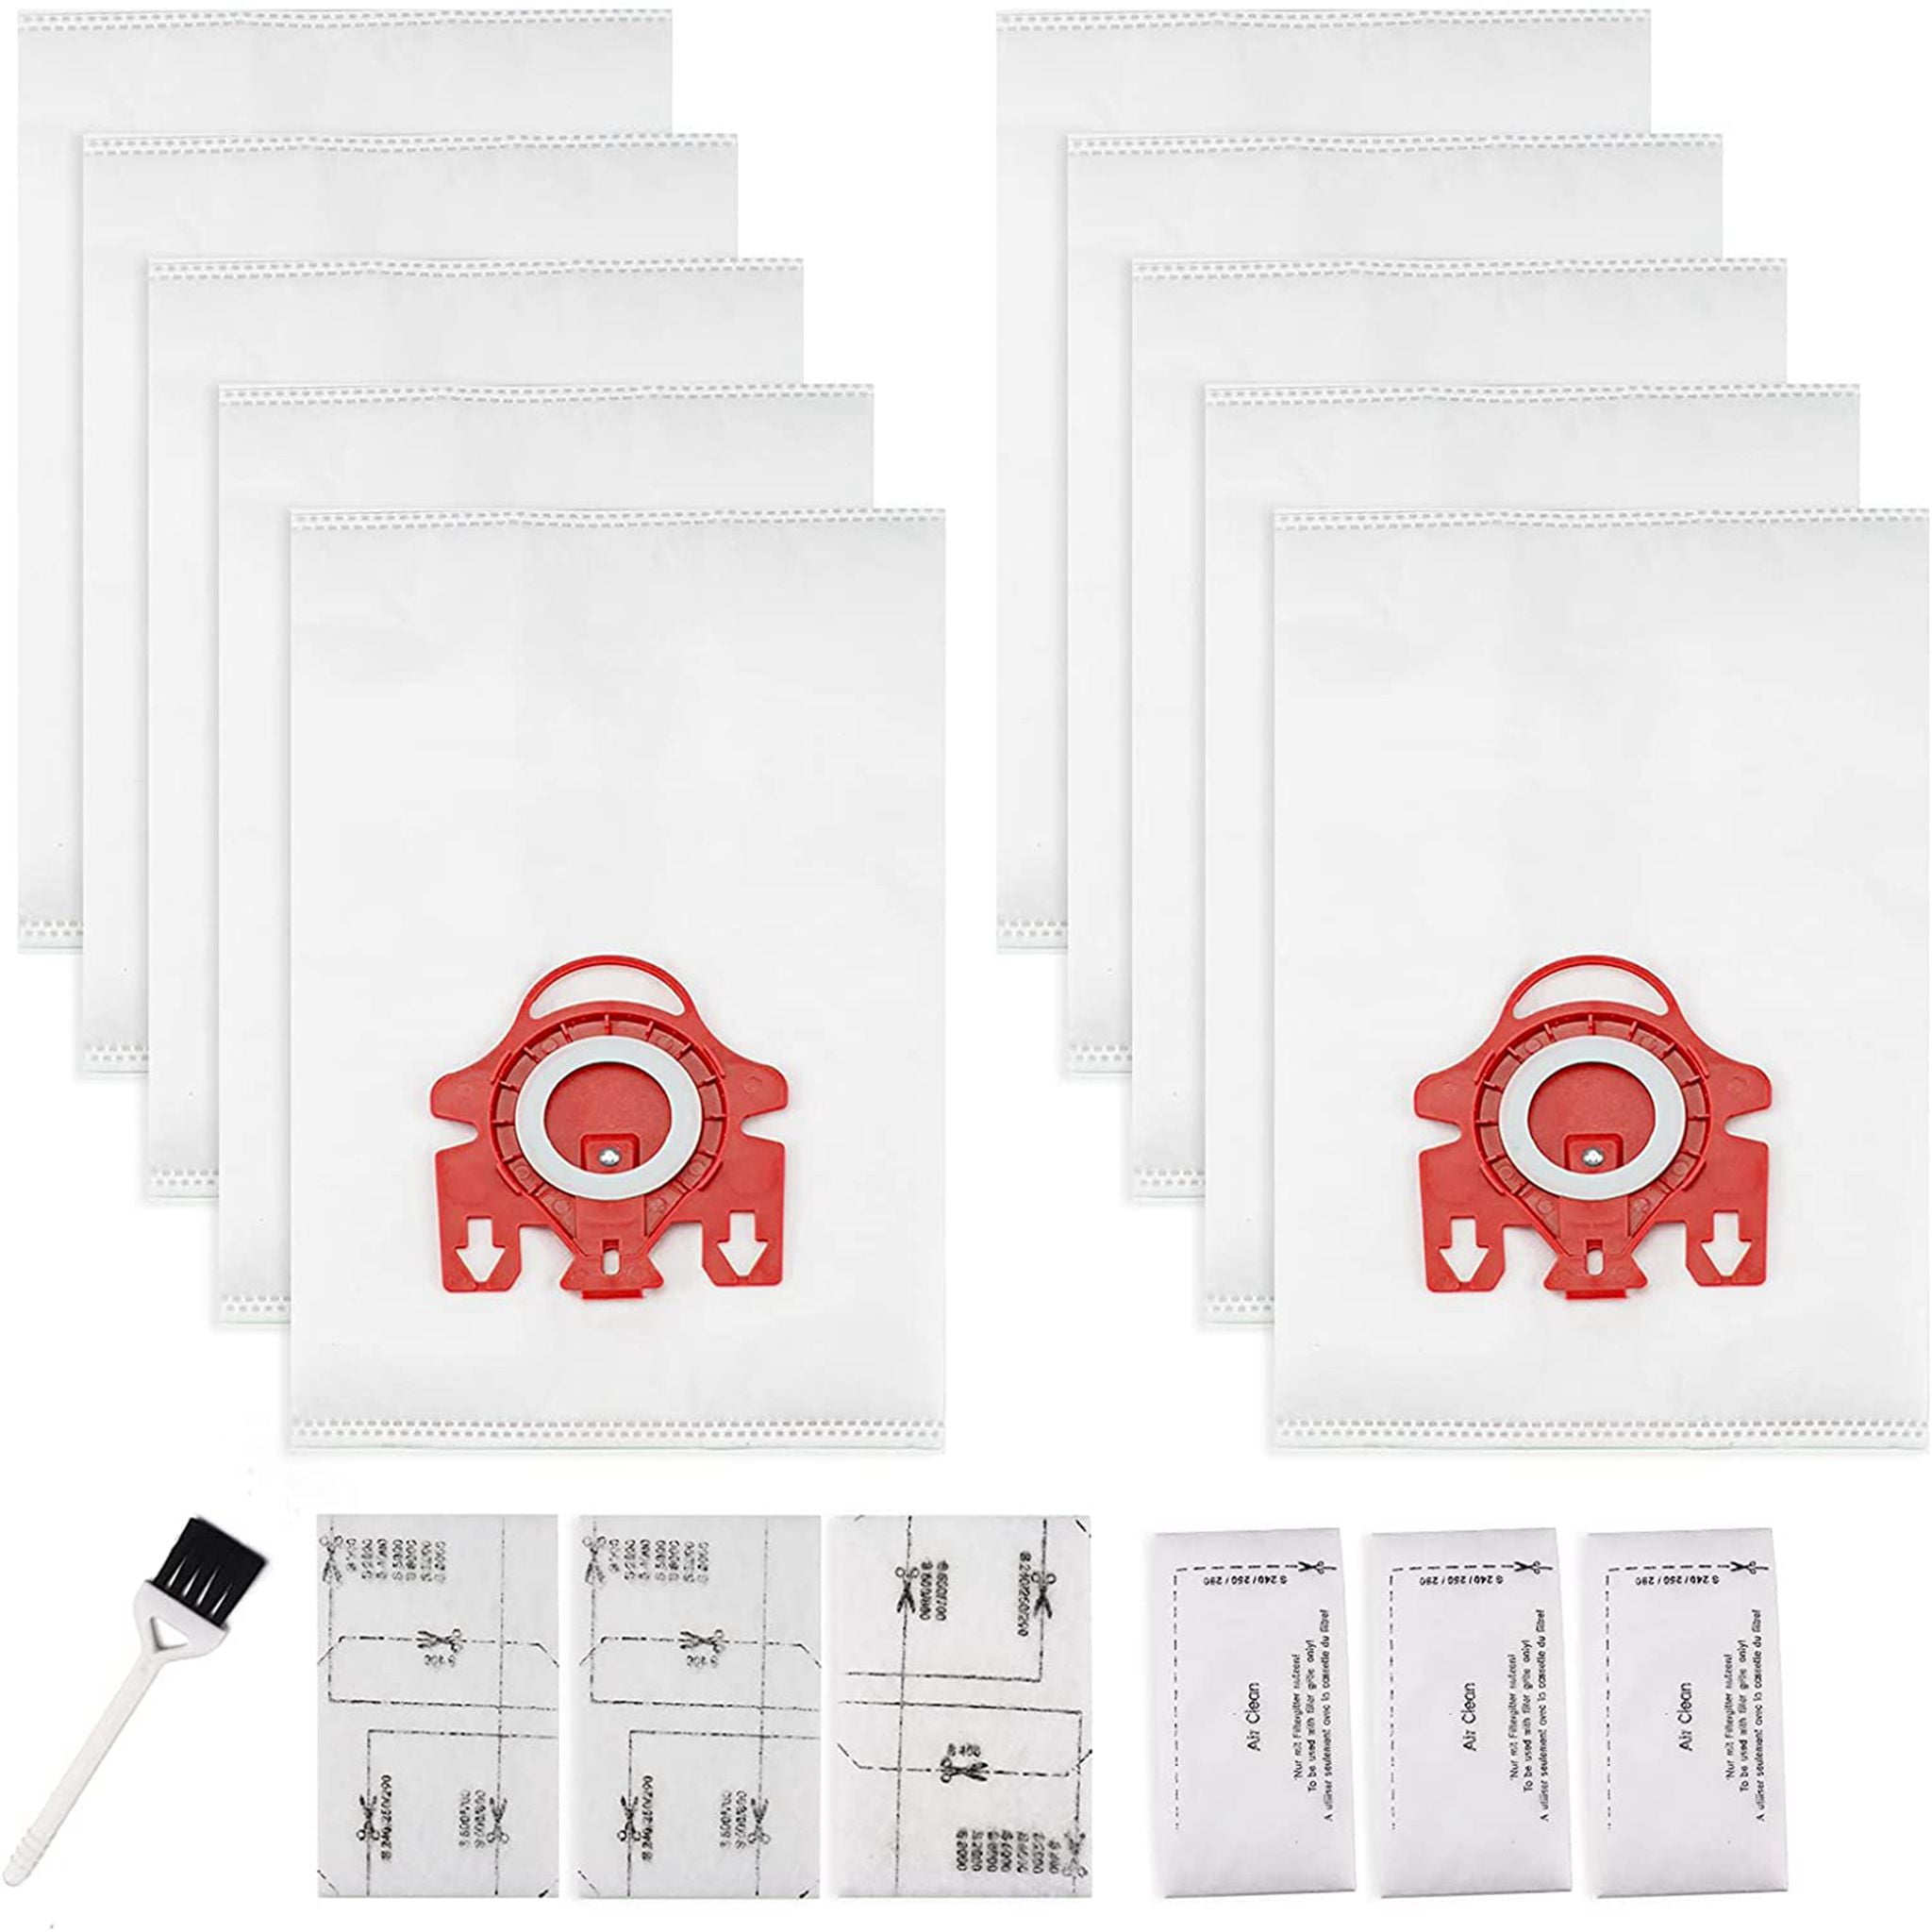 3D AirClean Dust Bags Replacement for Miele FJM Vacuum Compact C2 Compact C1 Complete C1 S241 S290 S300i S500 S700 S4 S6 Series (Pack of 10) with 3